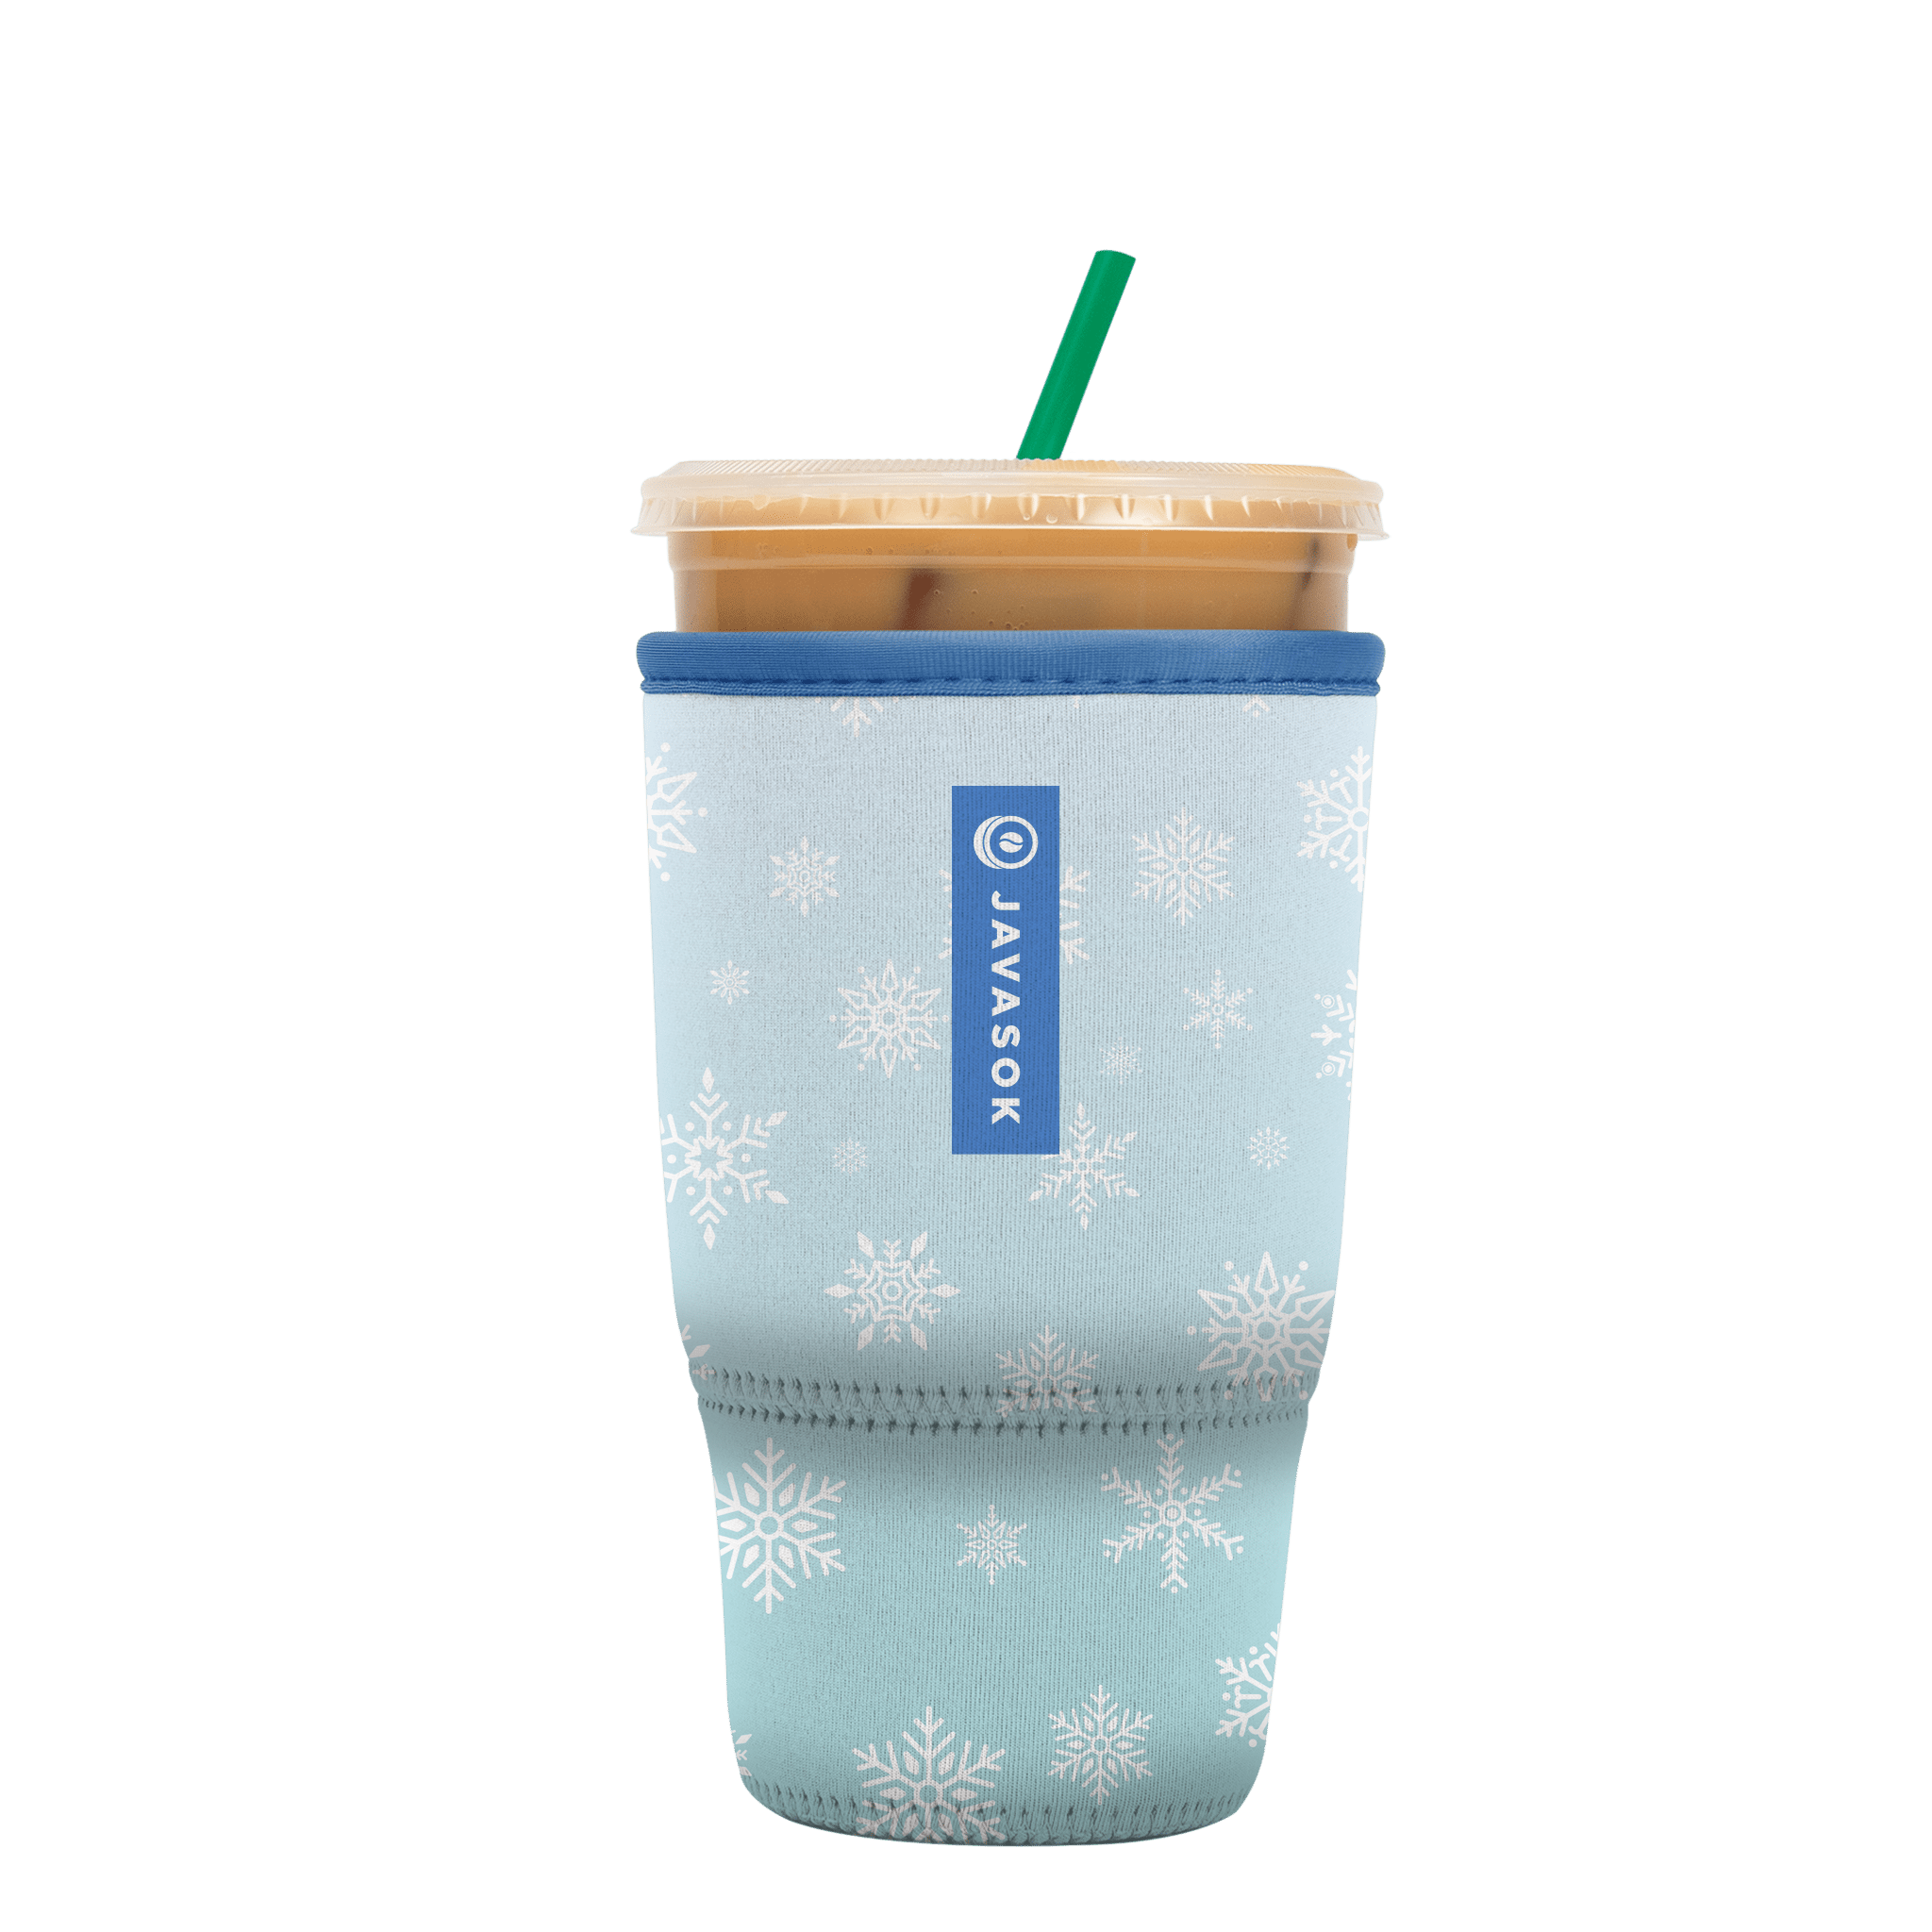 Iced Coffee Sleeve, Cold Drink and Beverage Sleeves